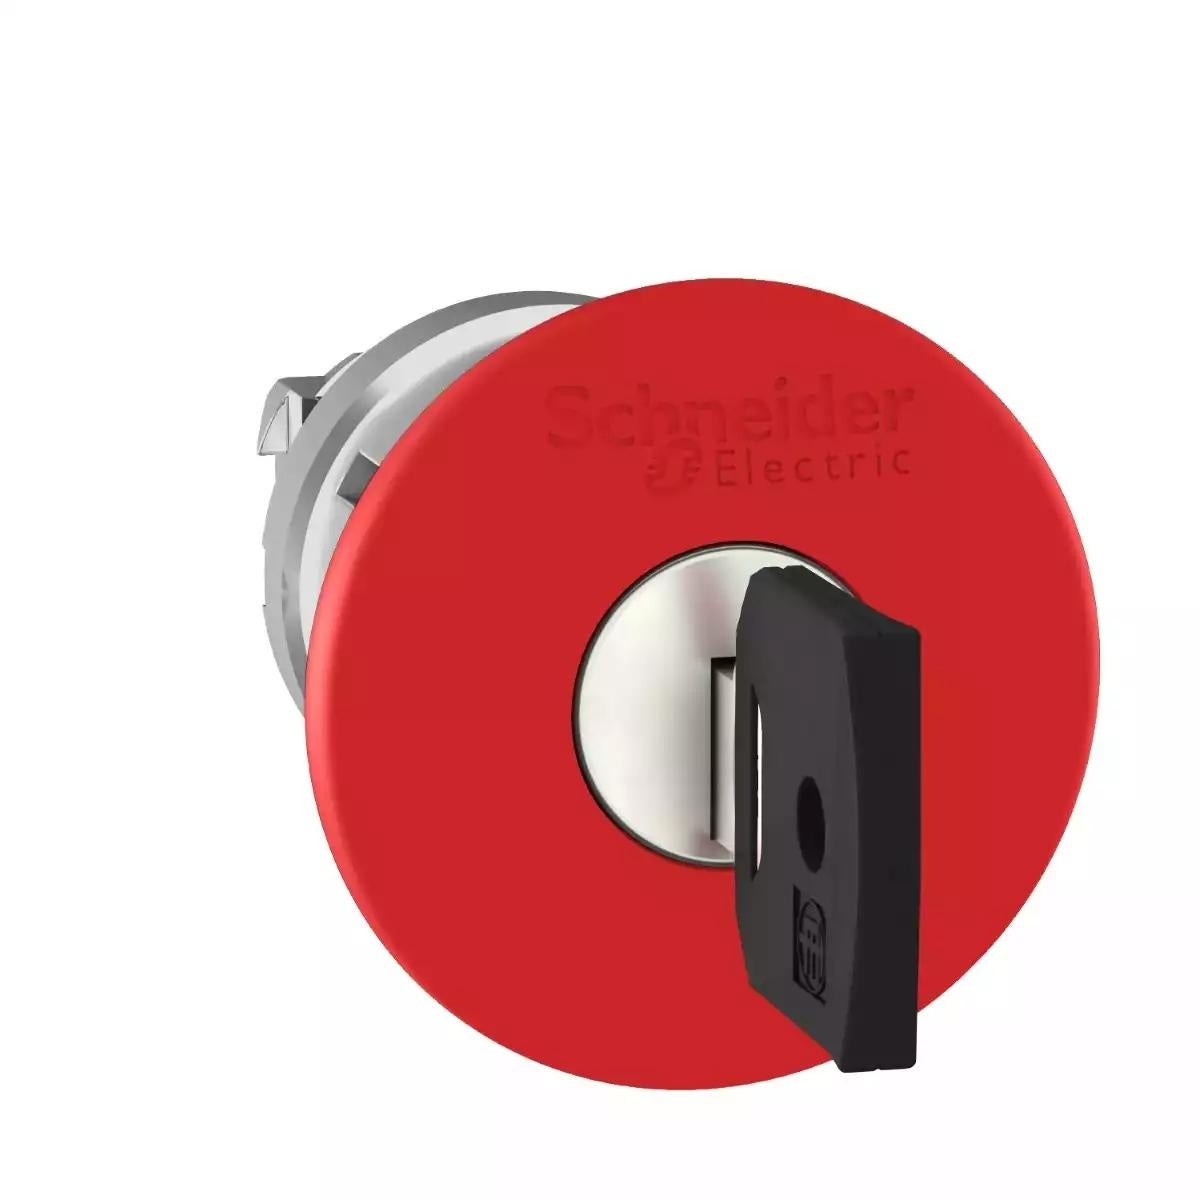 Head for emergency switching off push button, Harmony XB4, red Ø 40 stop, Ø22 mm trigger and latching key release